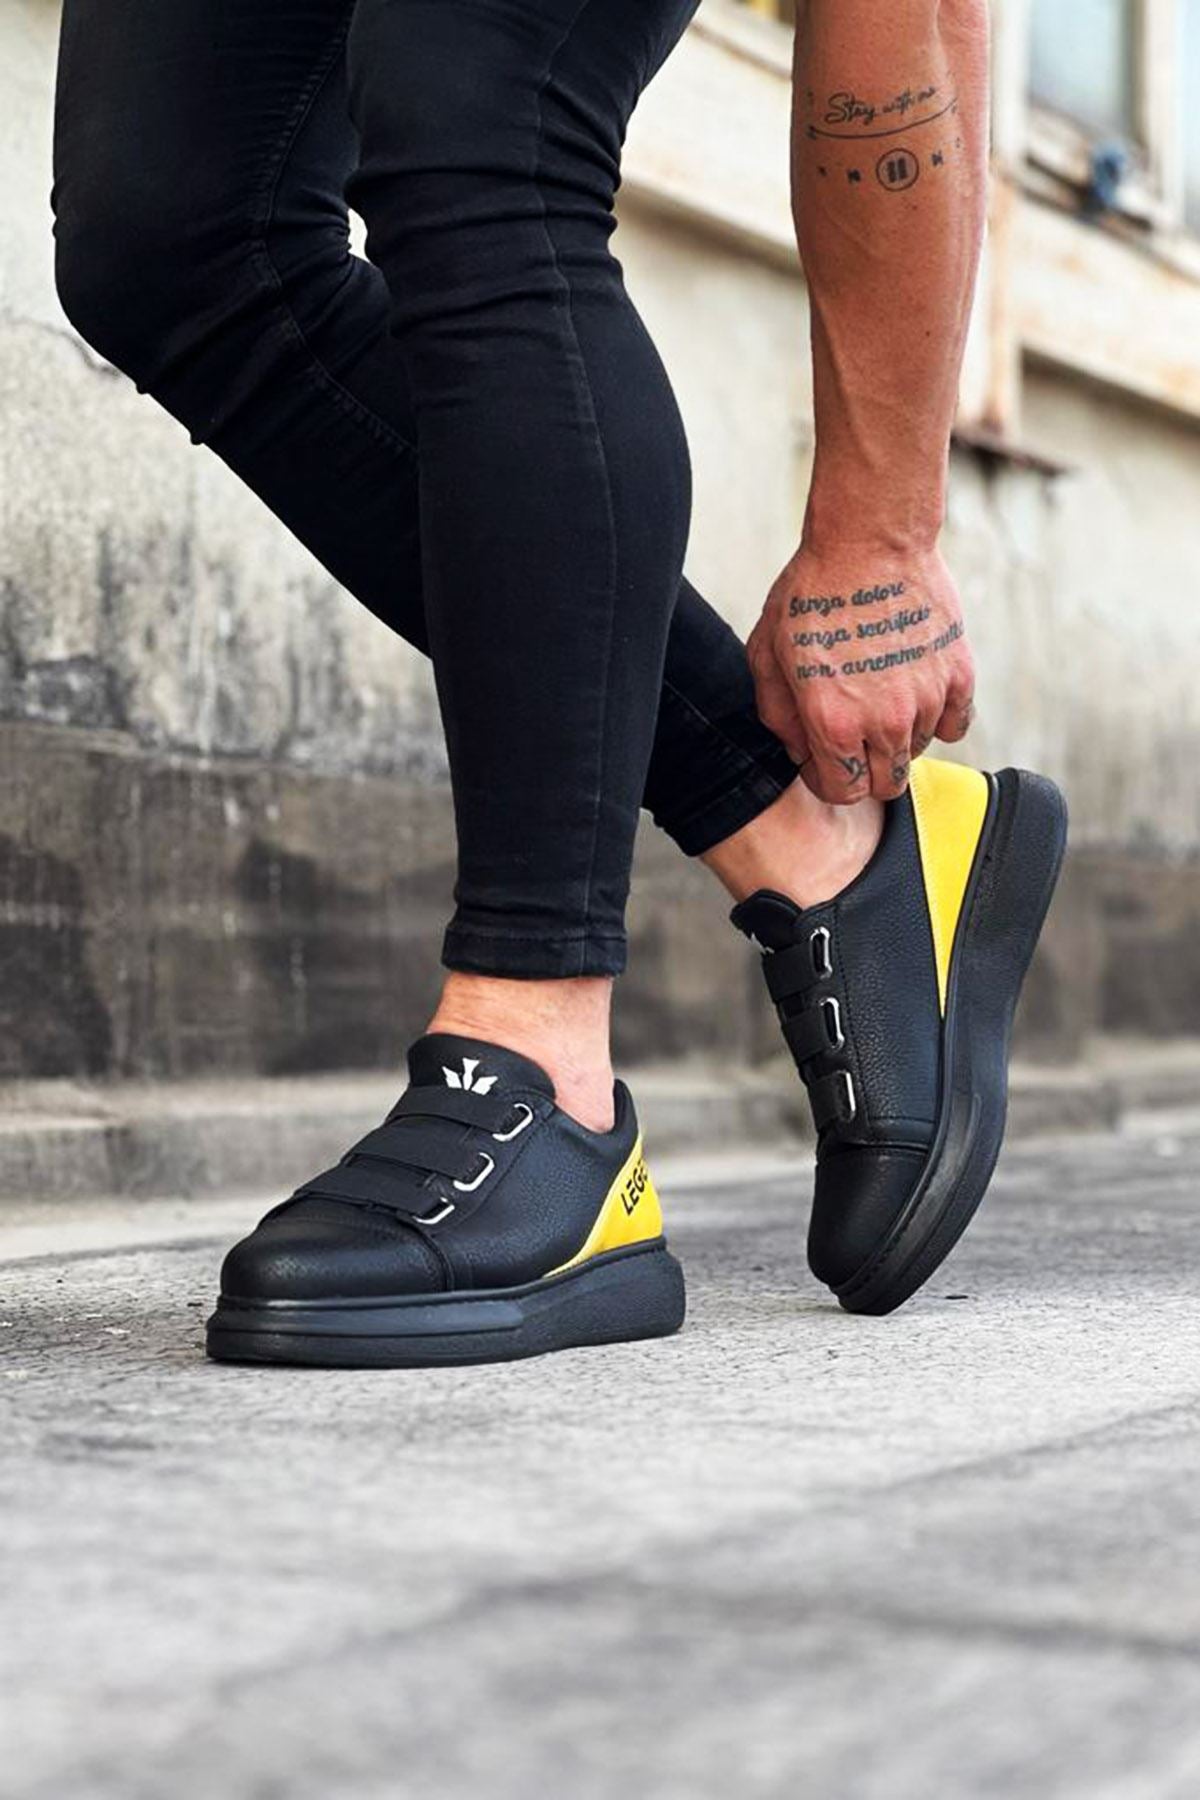 WG029 3 Stripes Legend Charcoal Yellow Thick Sole Casual Men's Shoes - STREETMODE™